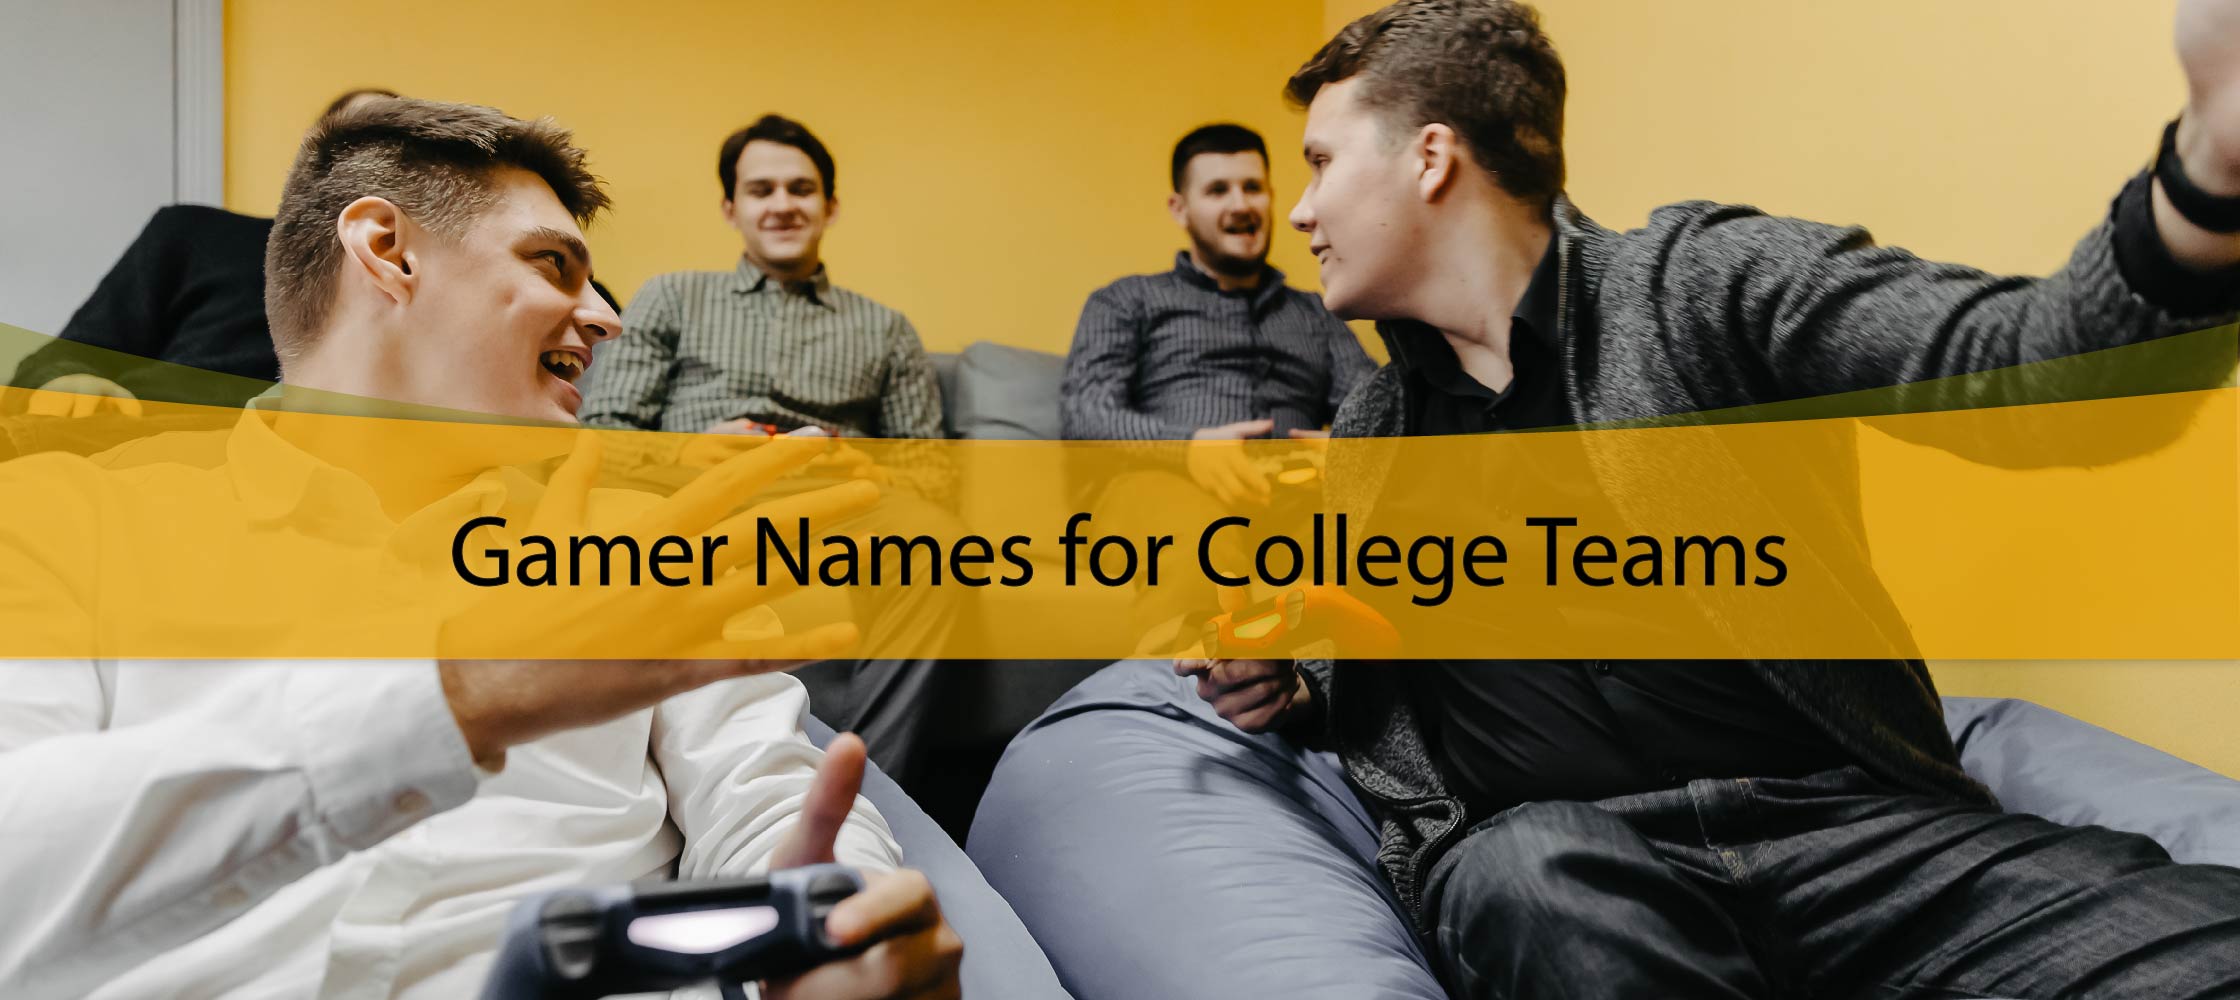 Gamer Names for College Teams